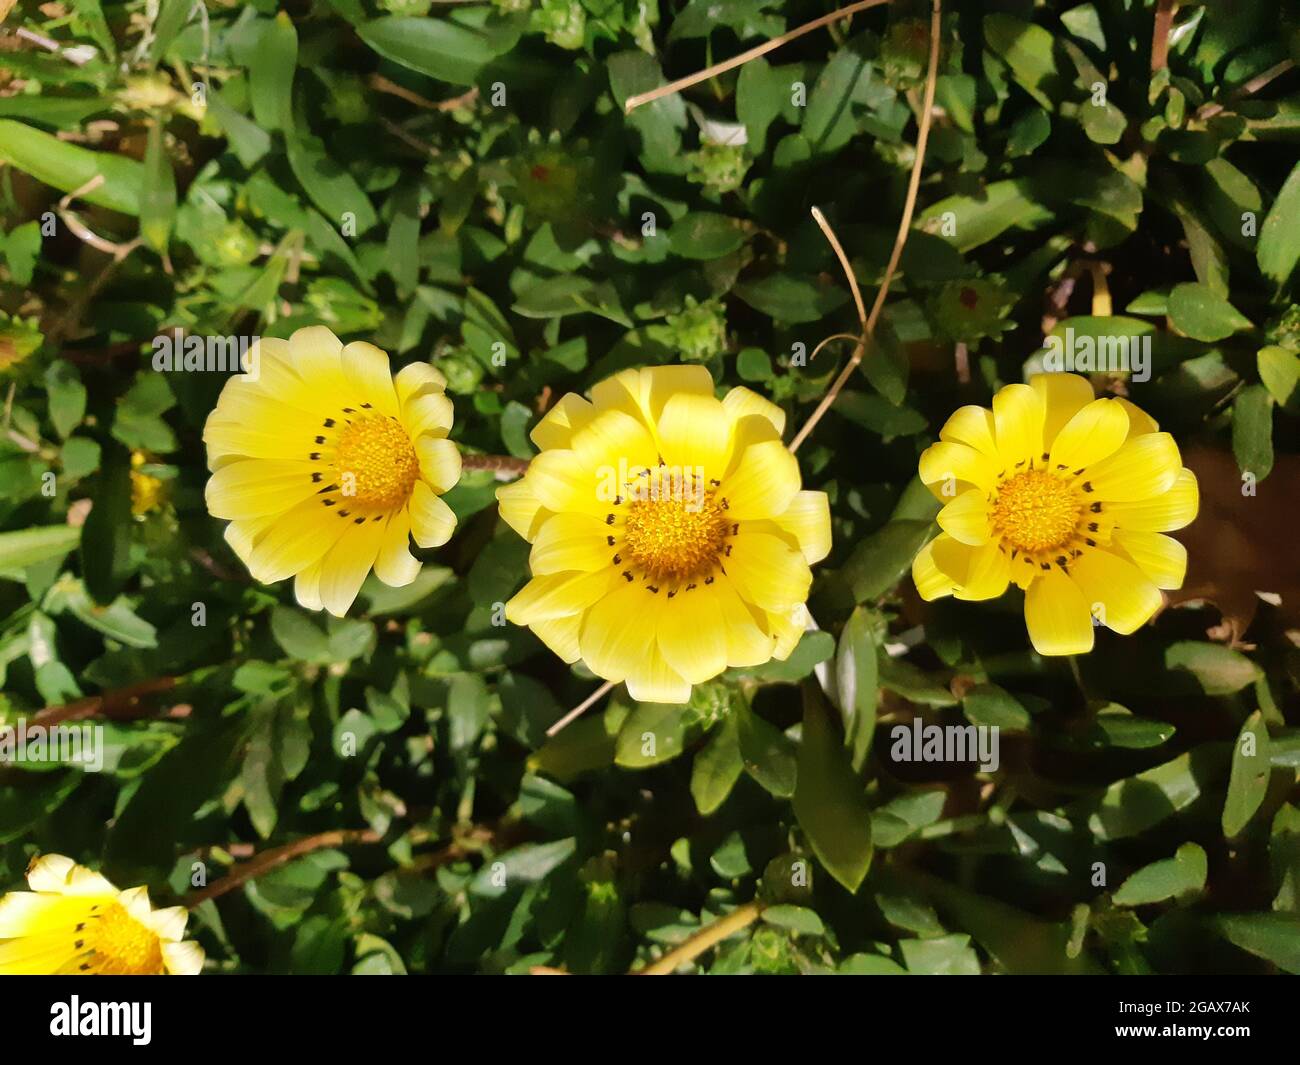 Yellow flowers blossom in the garden, Multicolored Flower Background. Stock Photo